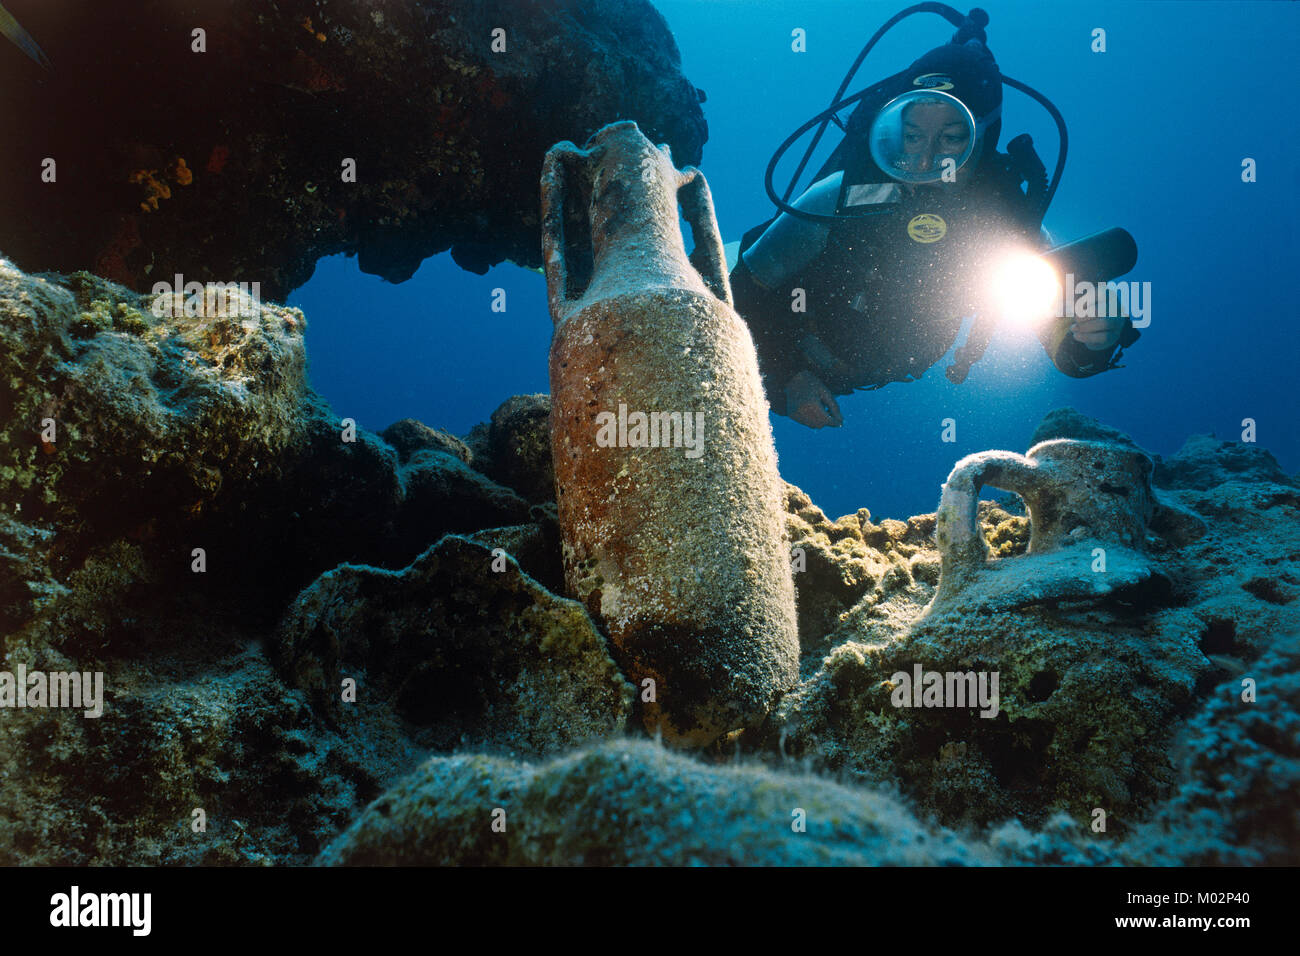 Scuba diver discover old ancient amphoras on seabed, Lykia, Mediterranean sea, Turkey Stock Photo